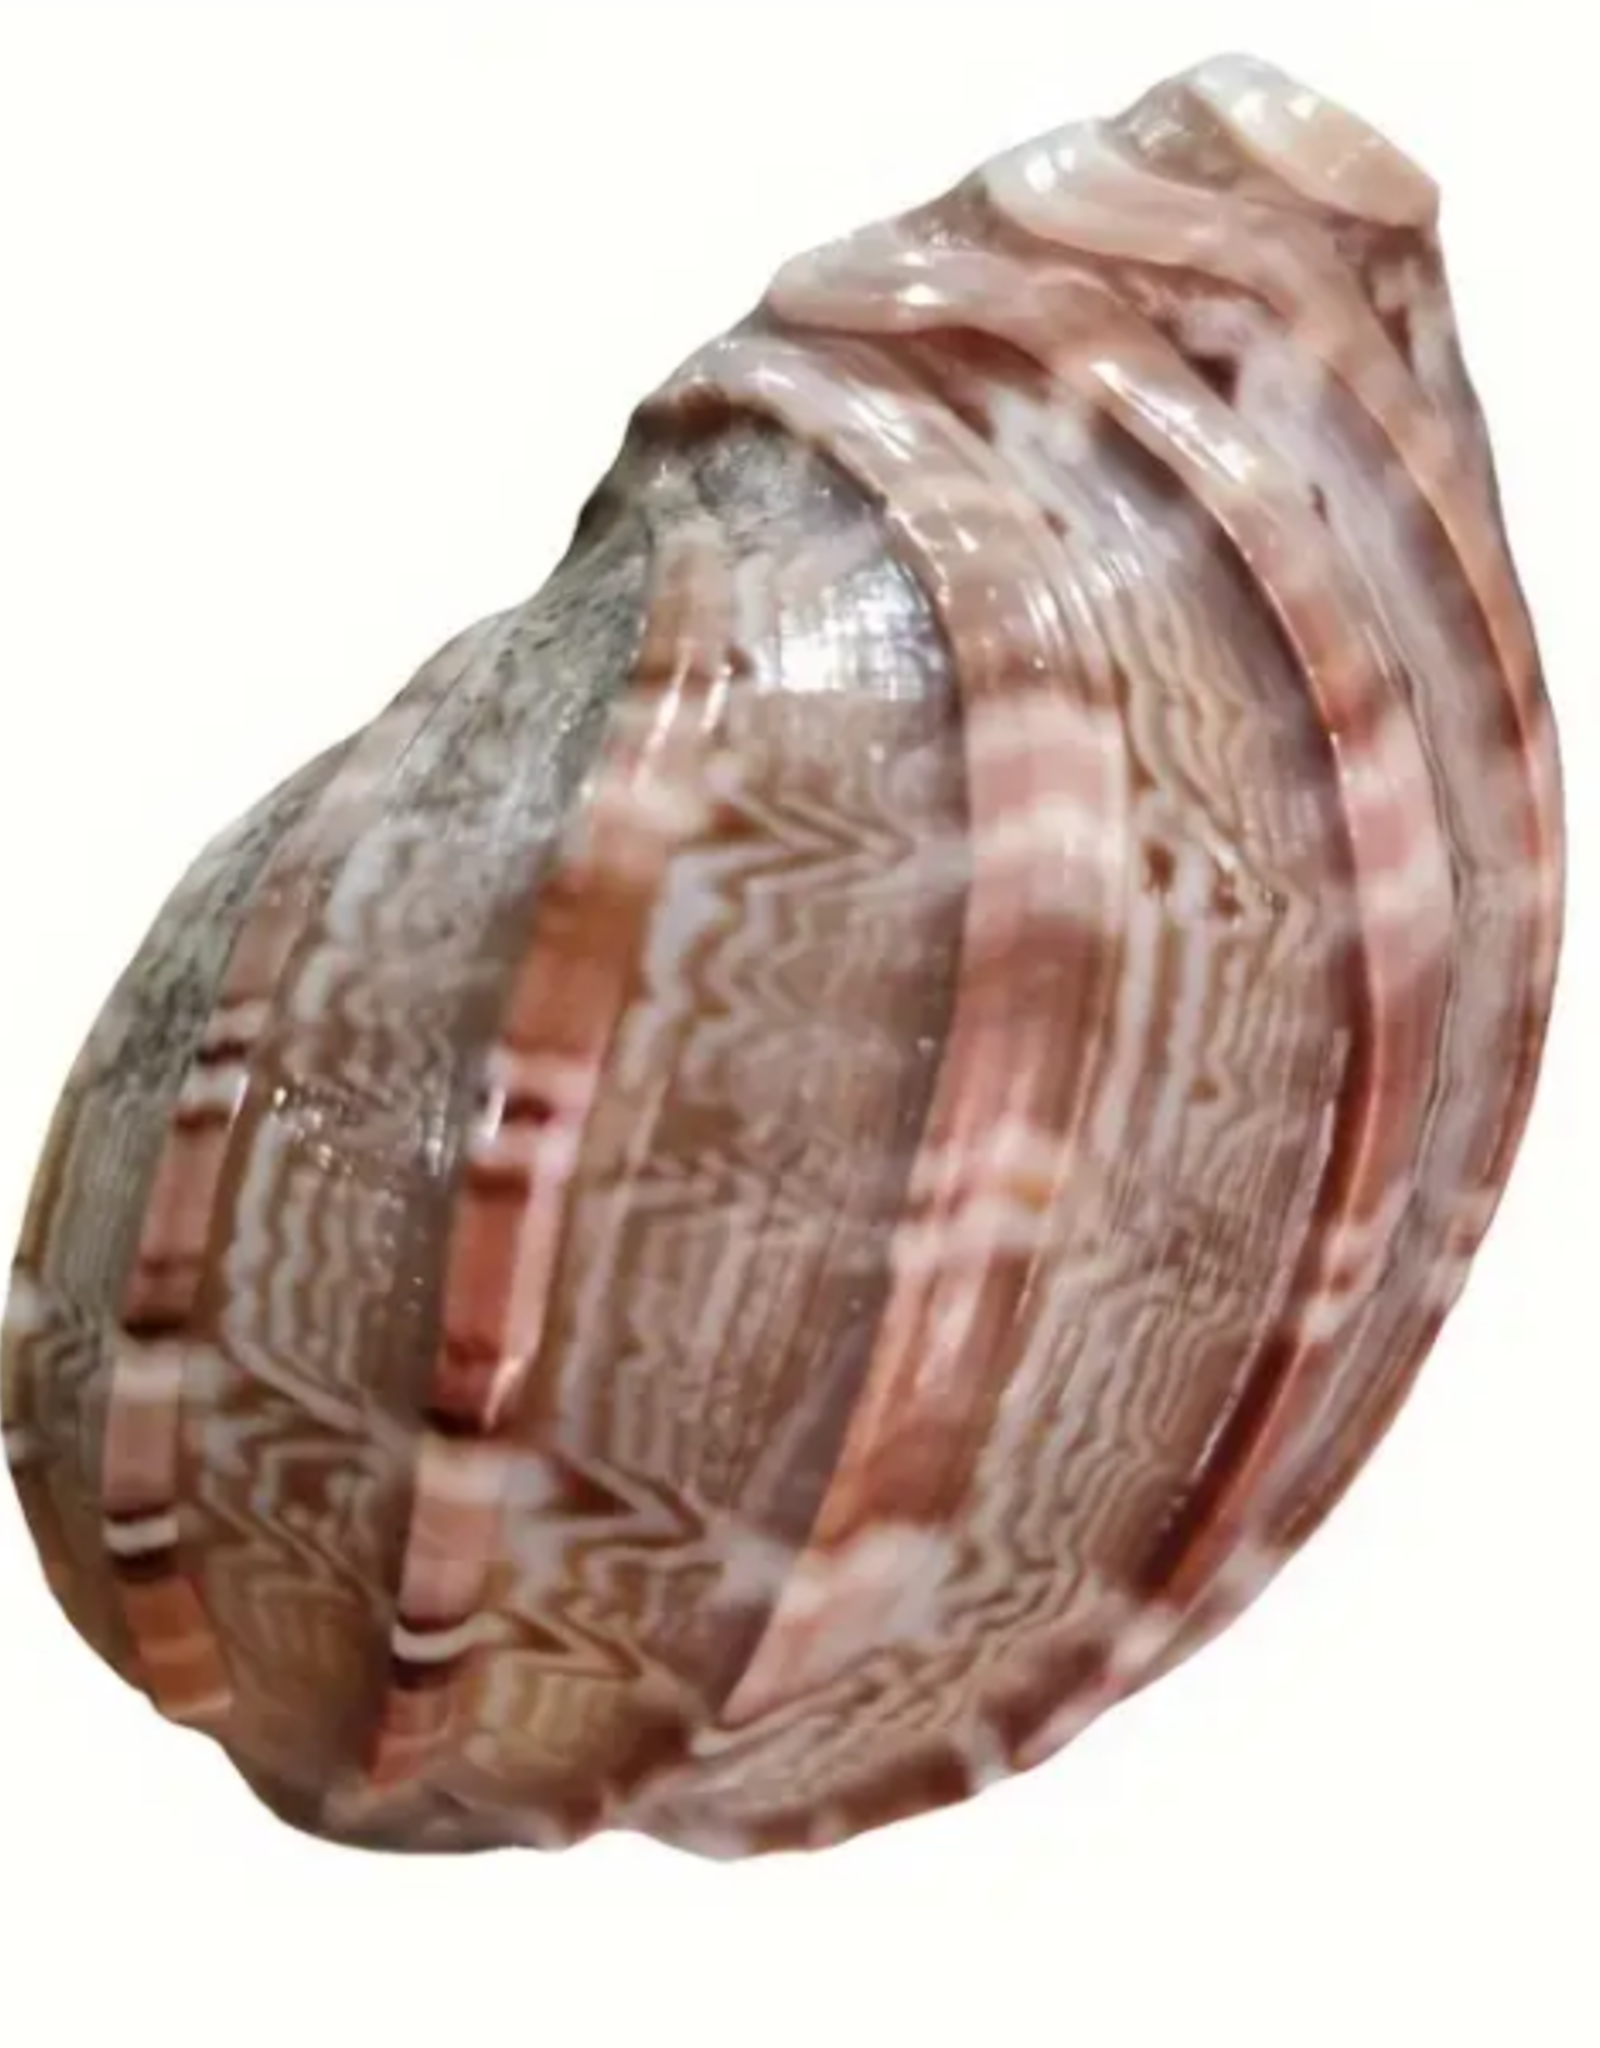 ZOO MED LABORATORIES, INC. HERMIT CRAB SHELL- 3X2.5X3.5-4- EXTRA LARGE- *SHELL DESIGN VARIES